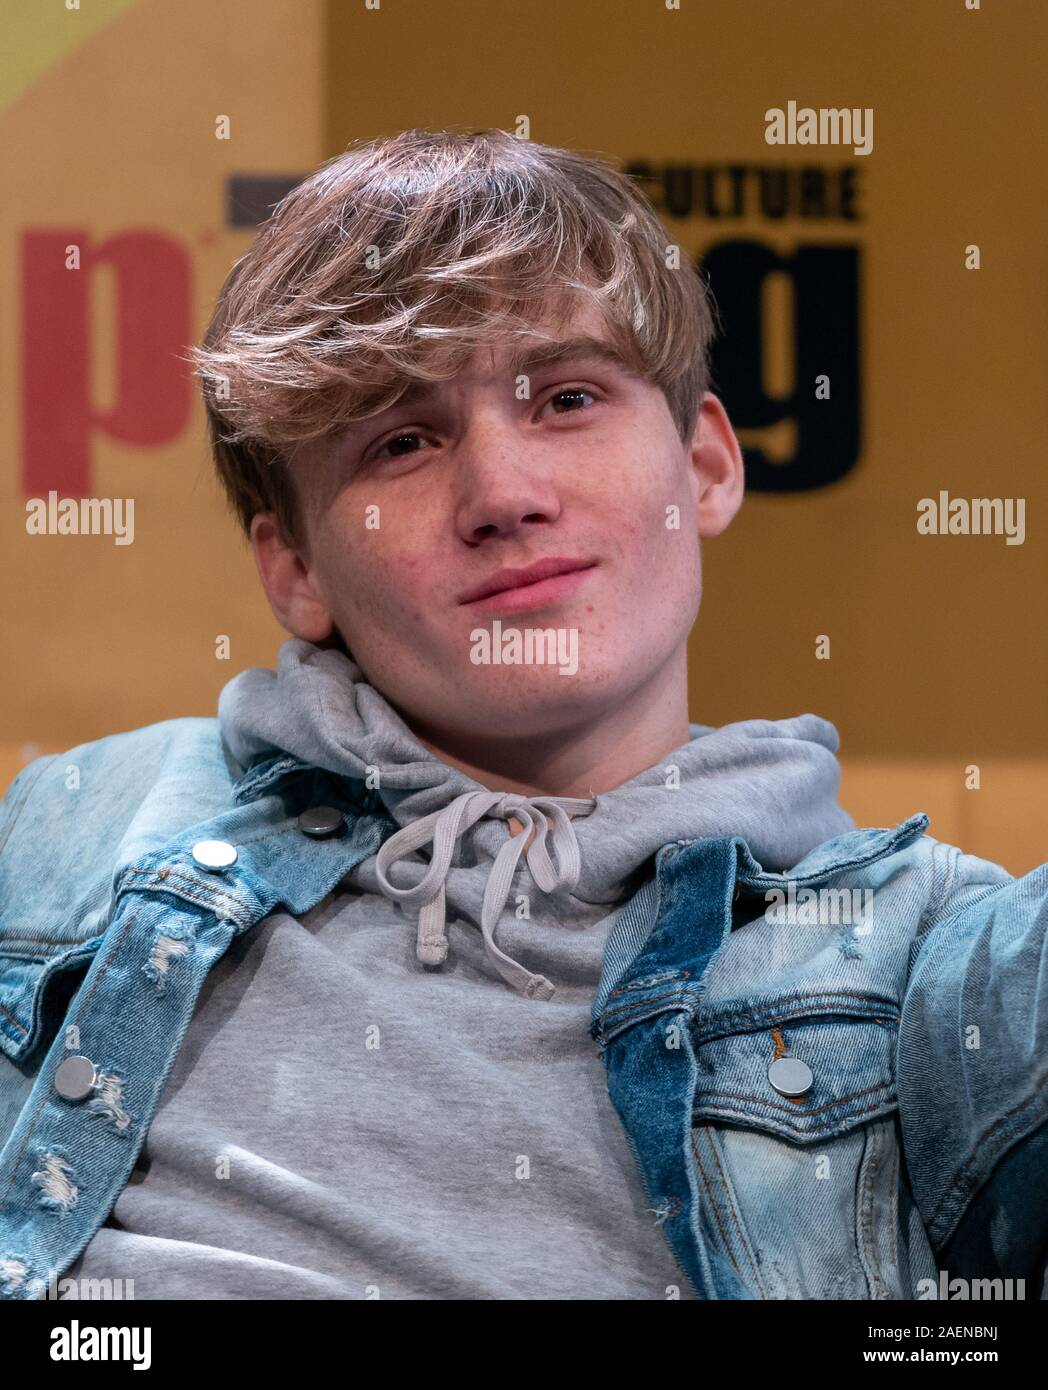 DORTMUND, GERMANY - December 7th 2019: Matt Linz (Actor - The Walking Dead)  at German Comic Con Dortmund, a two day fan convention Stock Photo - Alamy